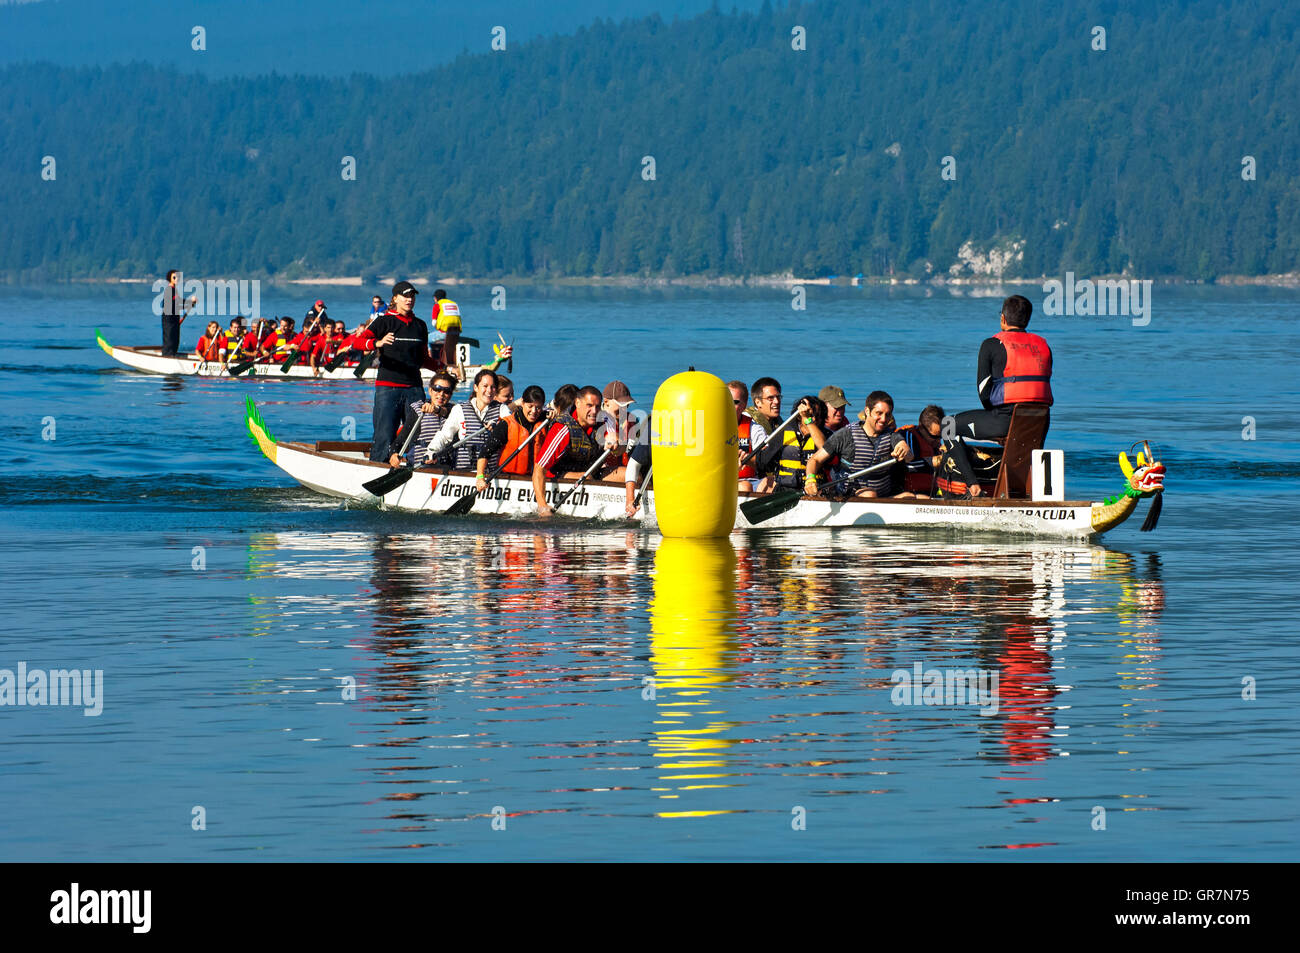 Dragon Boat At The Finishing Line Of A Boat Race On The Lake Lac De Joux, Vallée De Joux, Canton Of Vaud, Switzerland Stock Photo